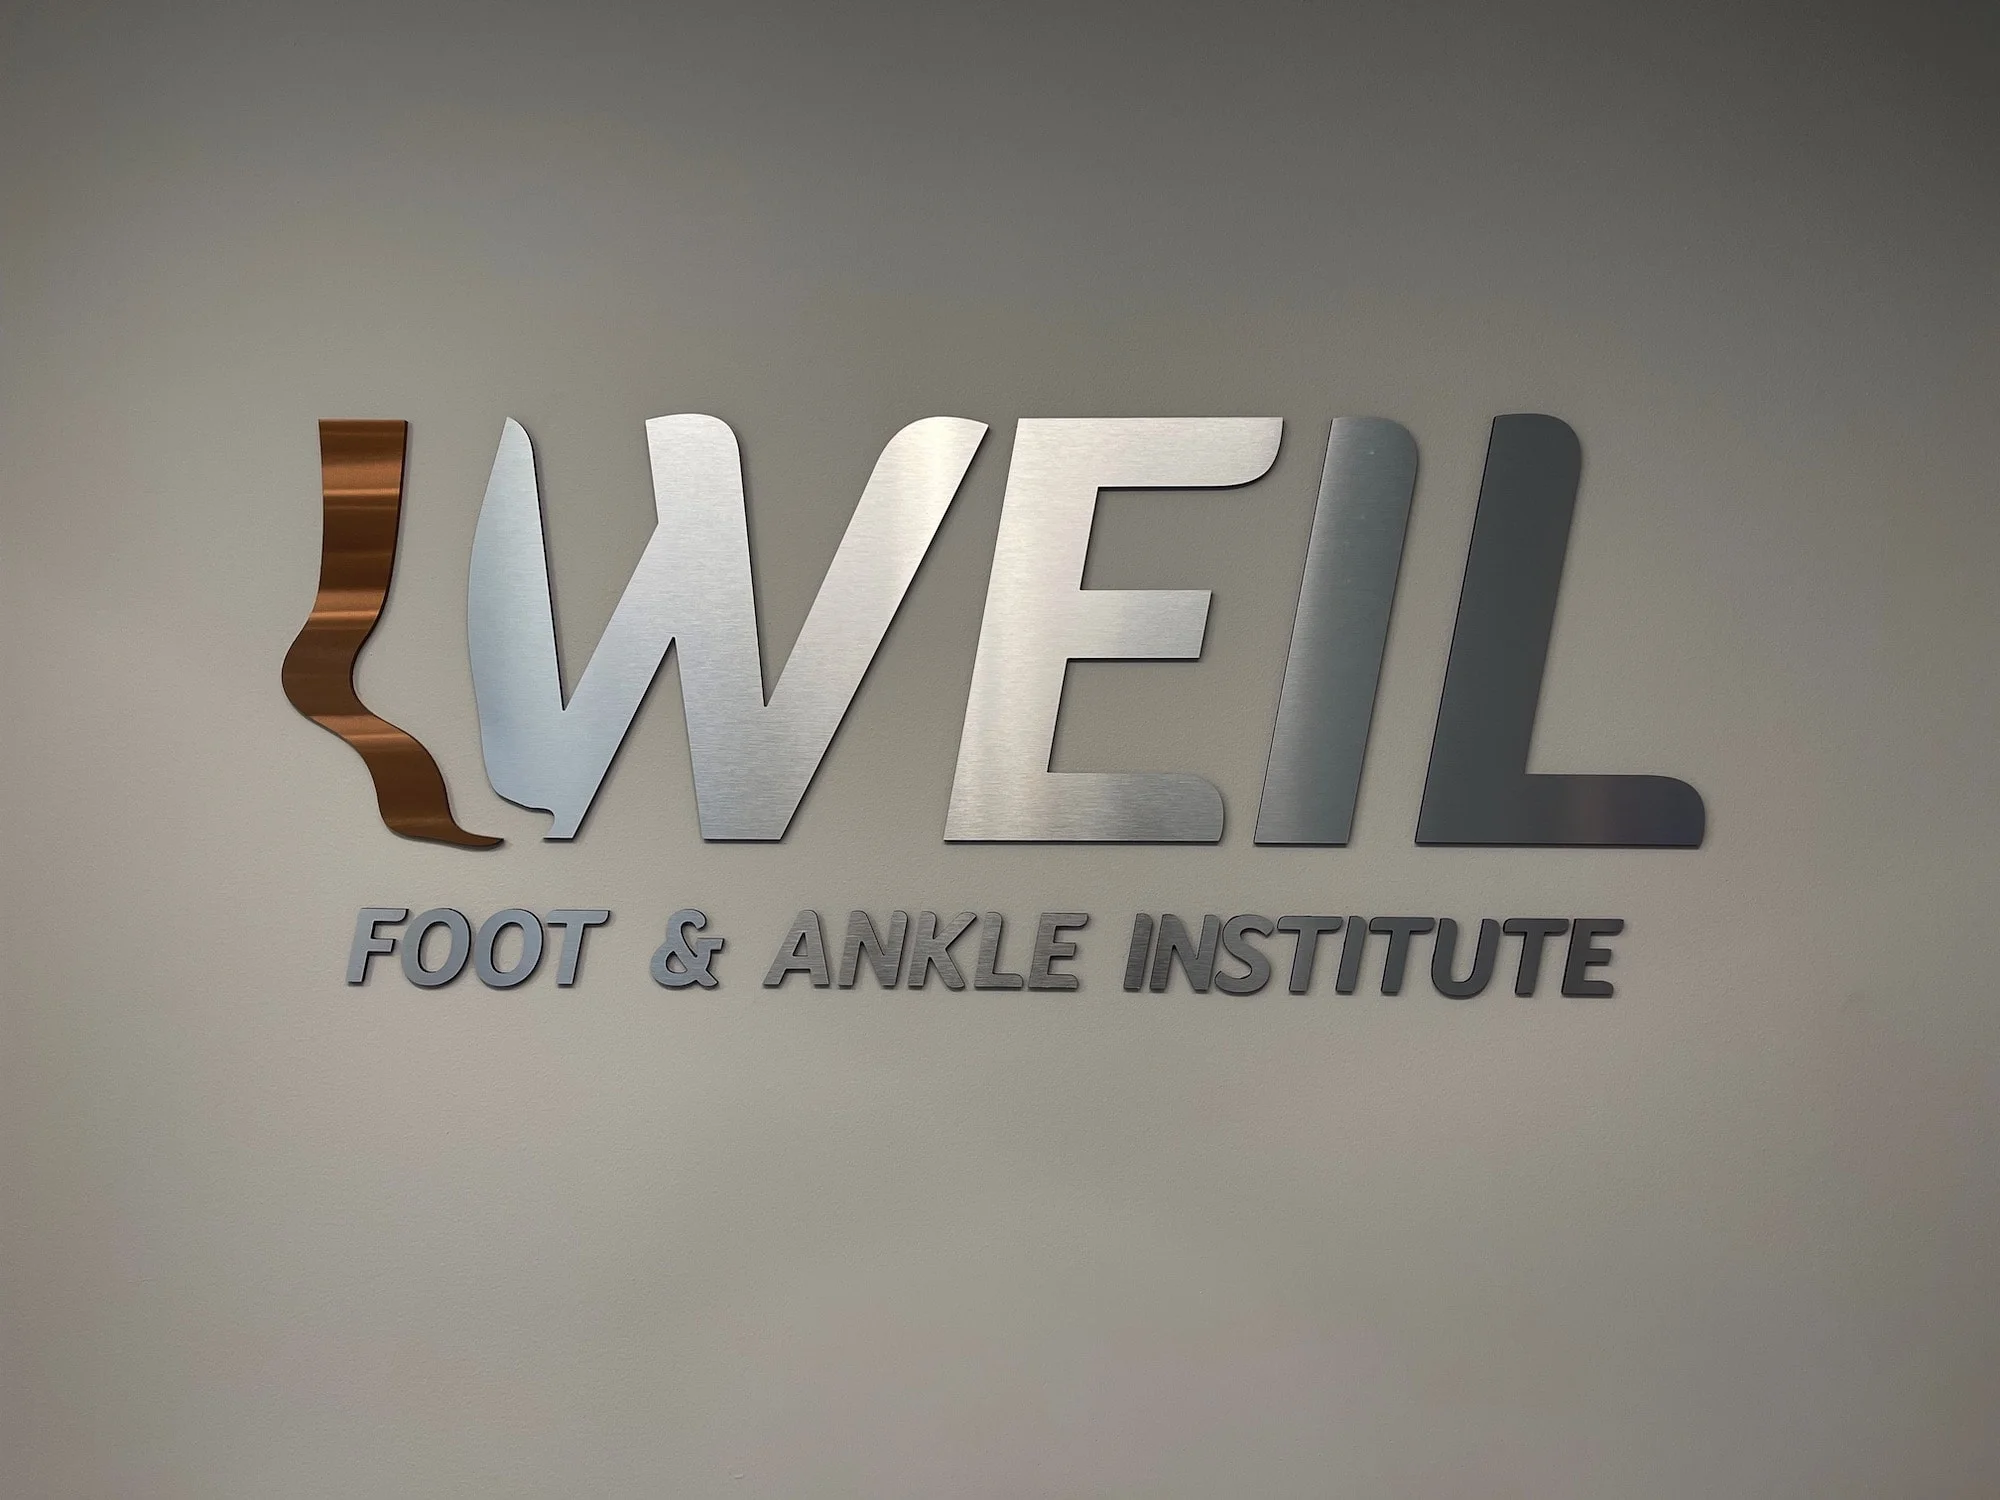 Weil Foot & Ankle Institute - Lincoln Park Signage